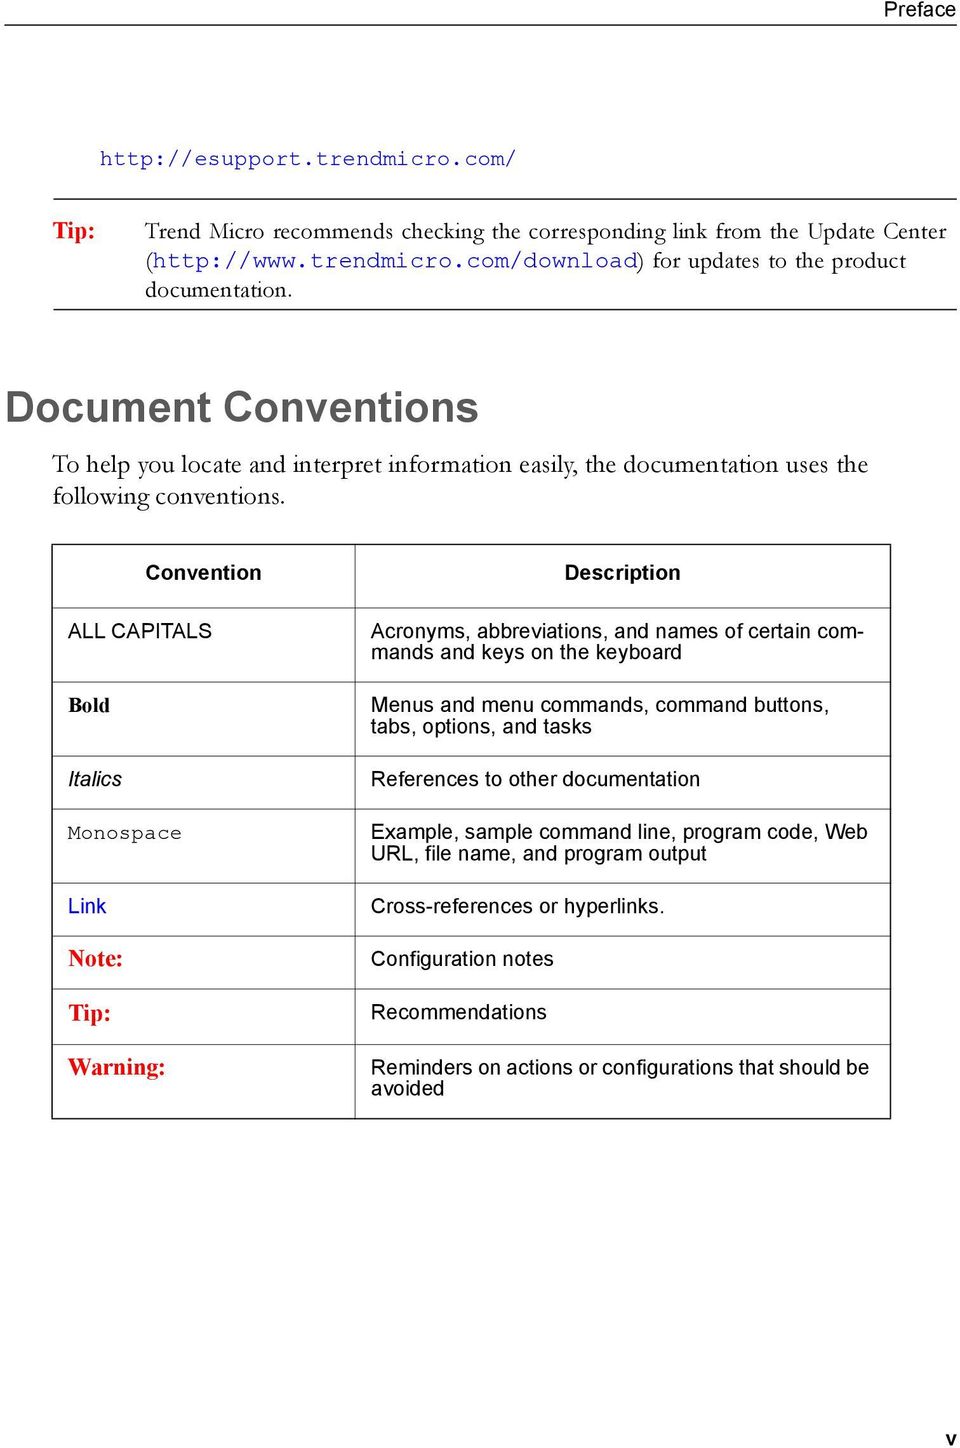 Convention ALL CAPITALS Bold Italics Monospace Link Tip: Warning: Description Acronyms, abbreviations, and names of certain commands and keys on the keyboard Menus and menu commands, command buttons,